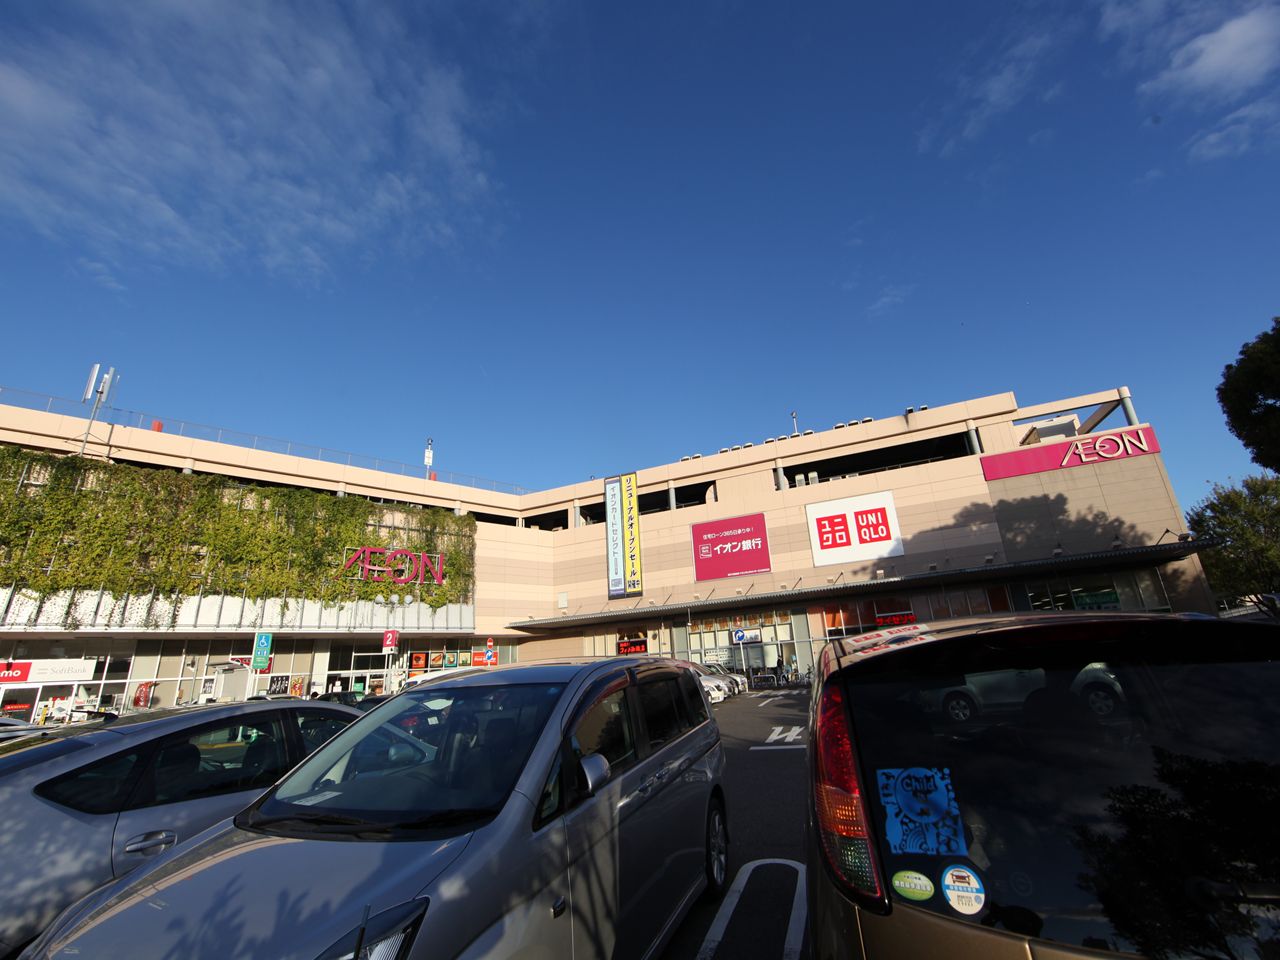 Shopping centre. 1500m until the ion Town Chikusa store (24-hour Super) (shopping center)